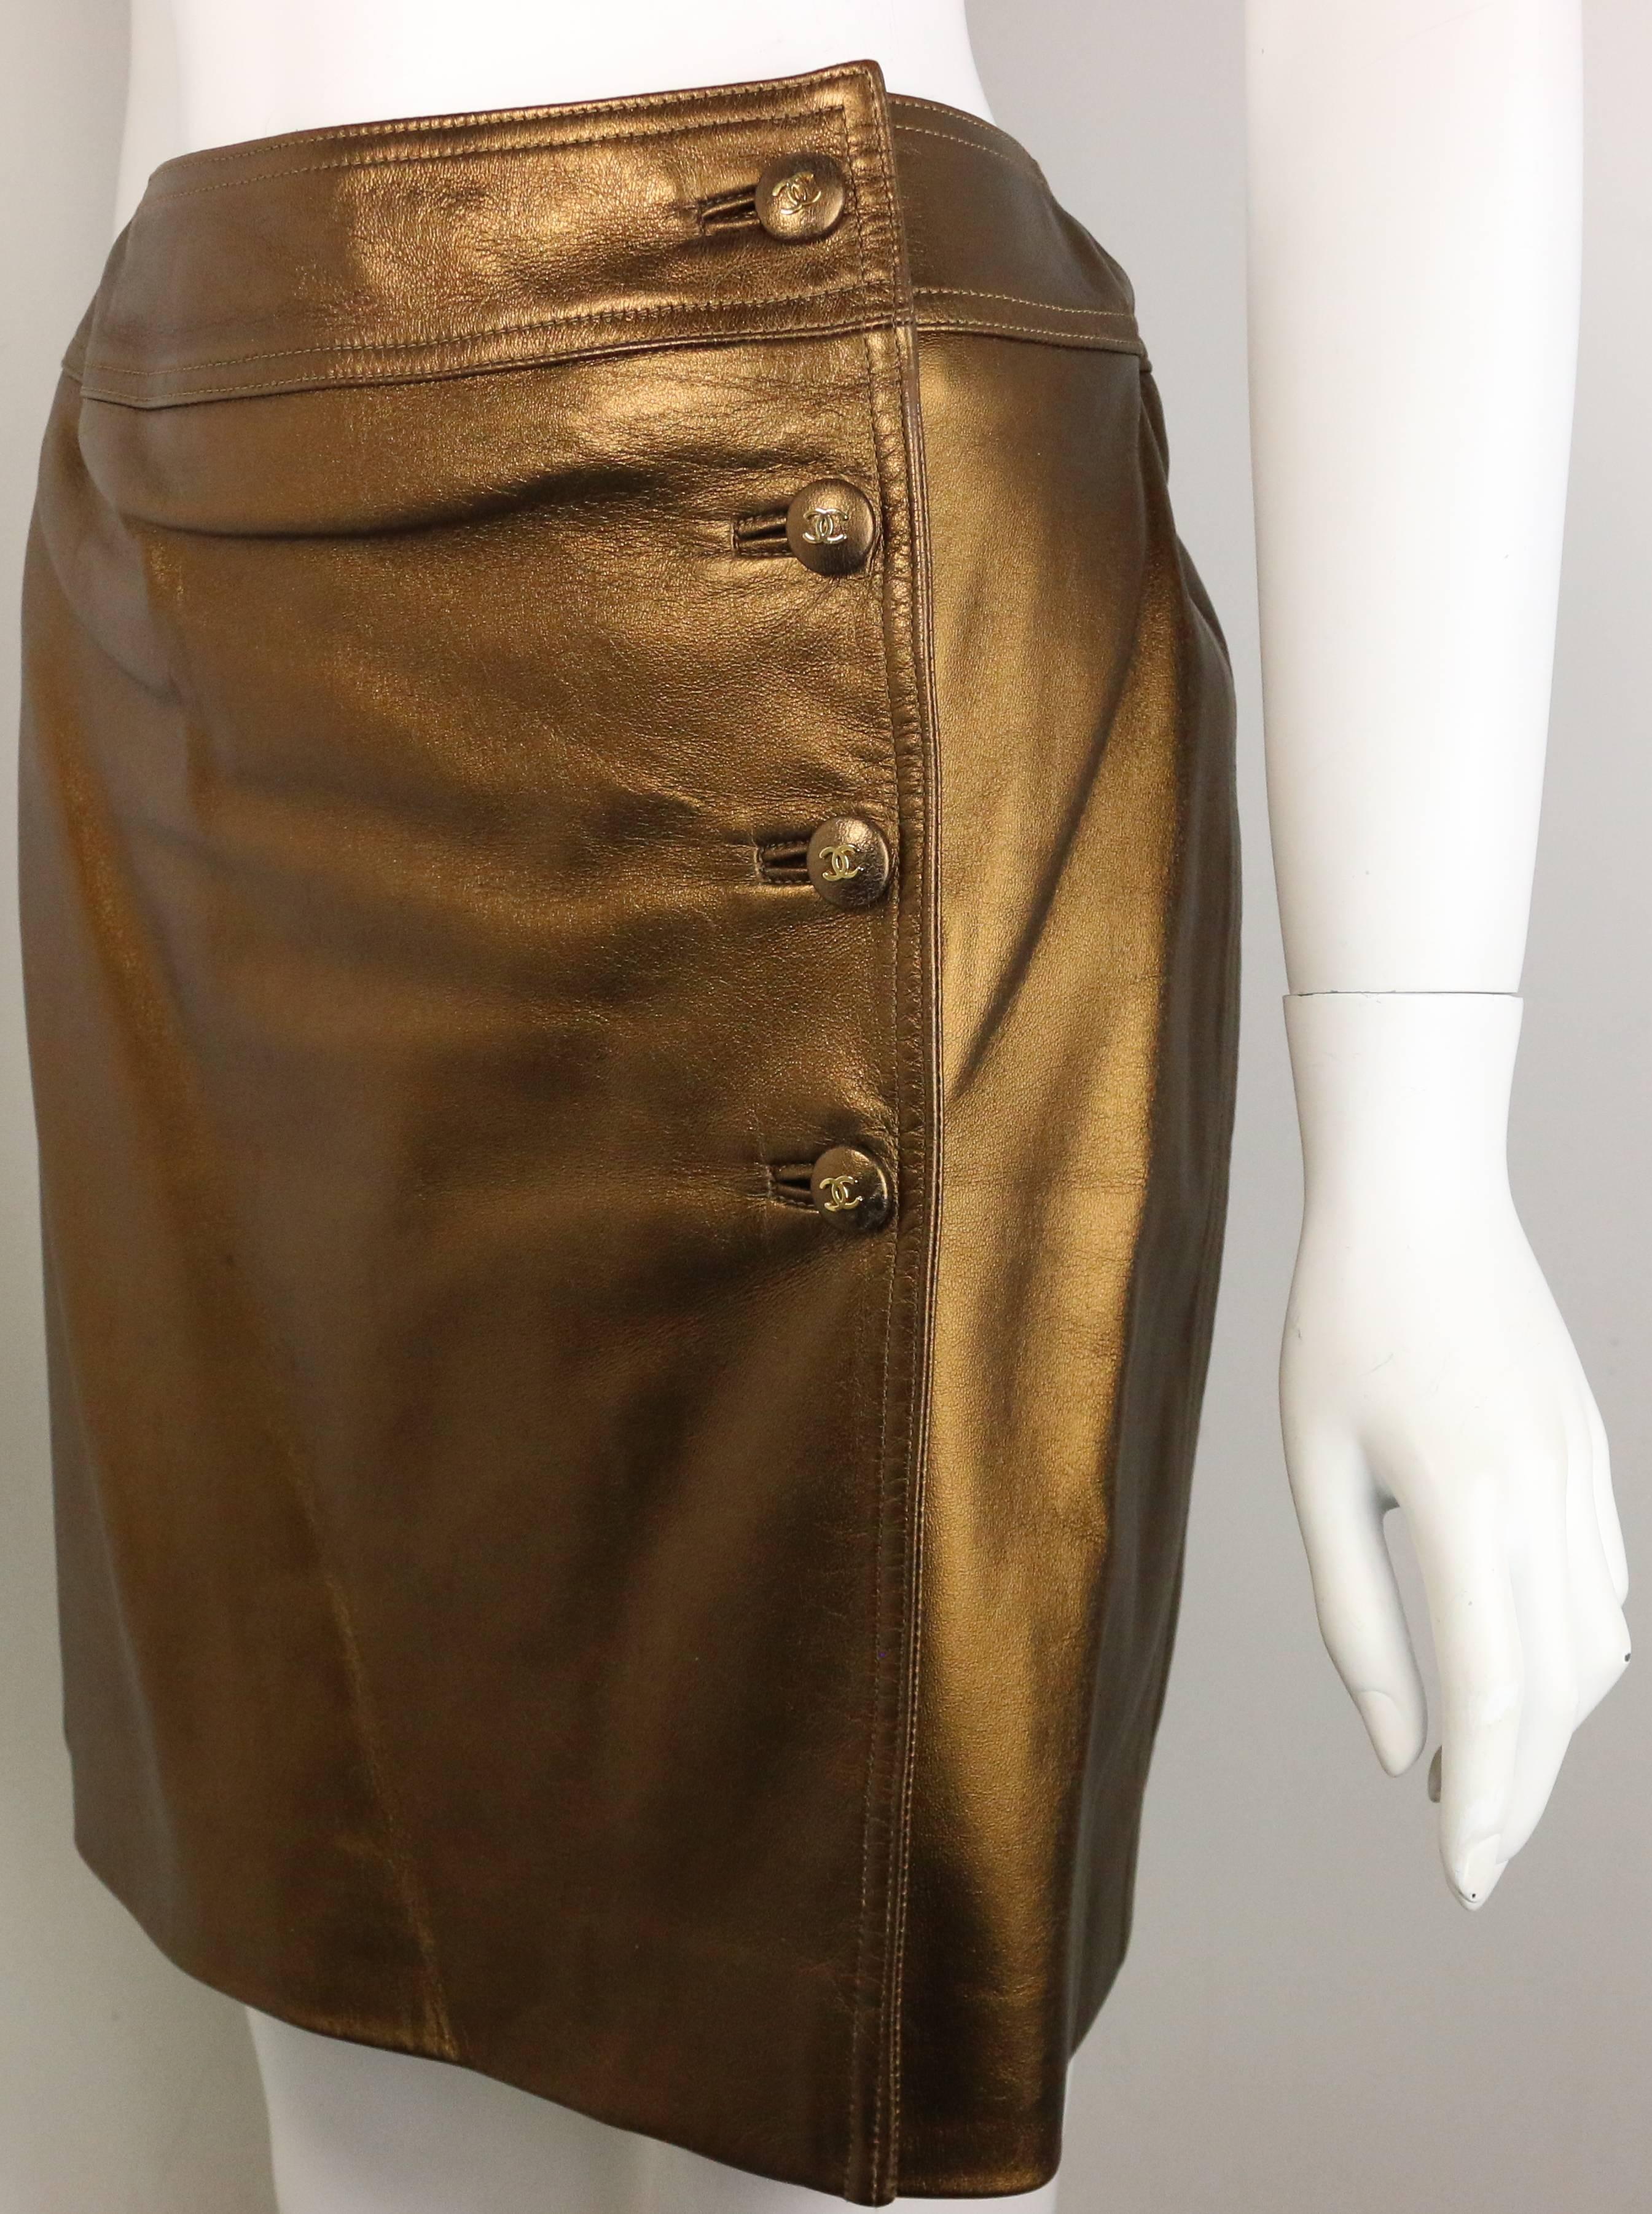 - Chanel bronze metallic lambskin leather wrap skirt from Fall 1996 collection. 

- Featuring four bronze metallic 